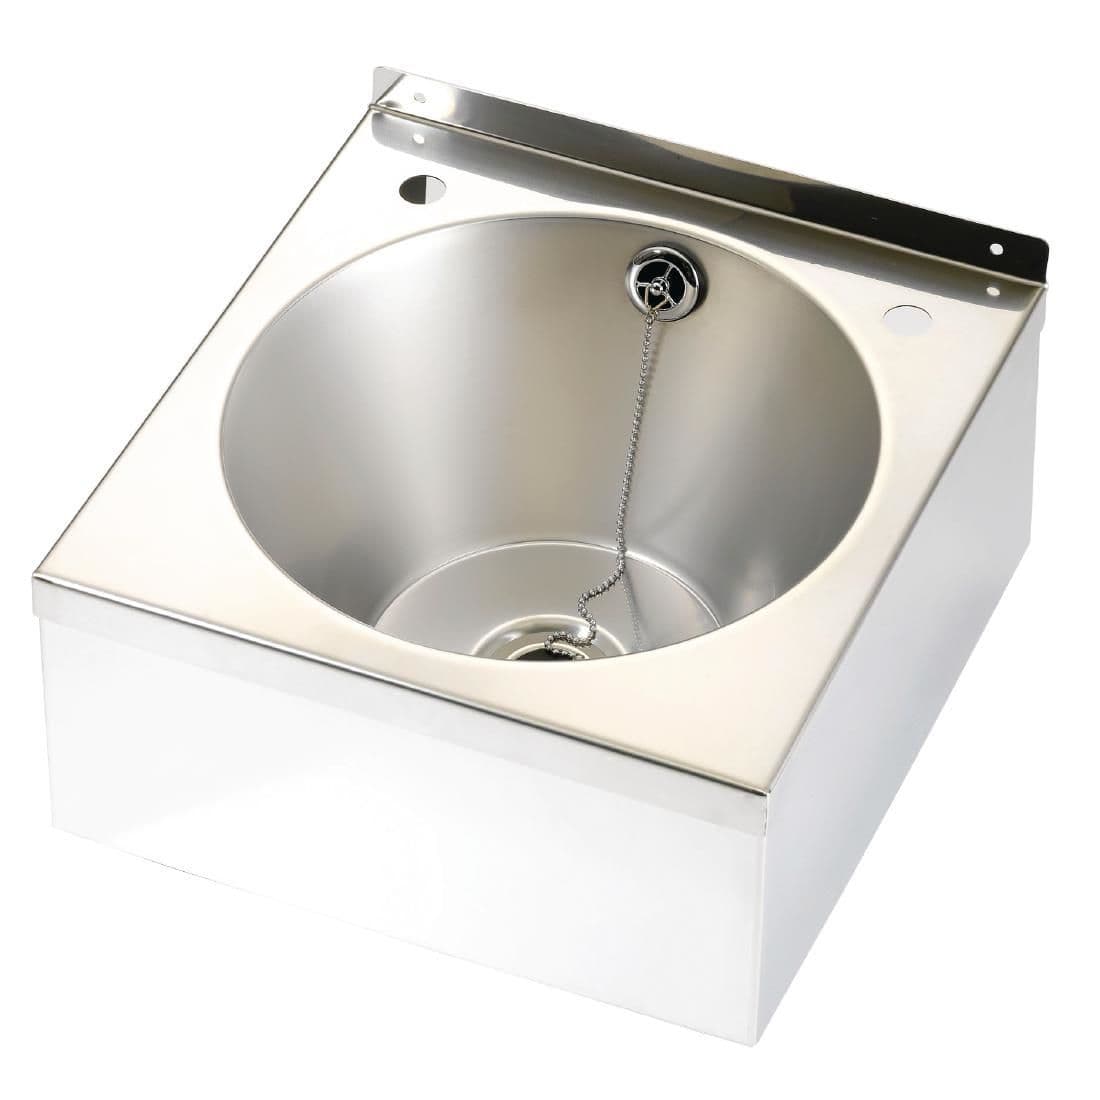 Franke Sissons Stainless Steel Wash Basin with Waste Kit 345x340x185mm JD Catering Equipment Solutions Ltd